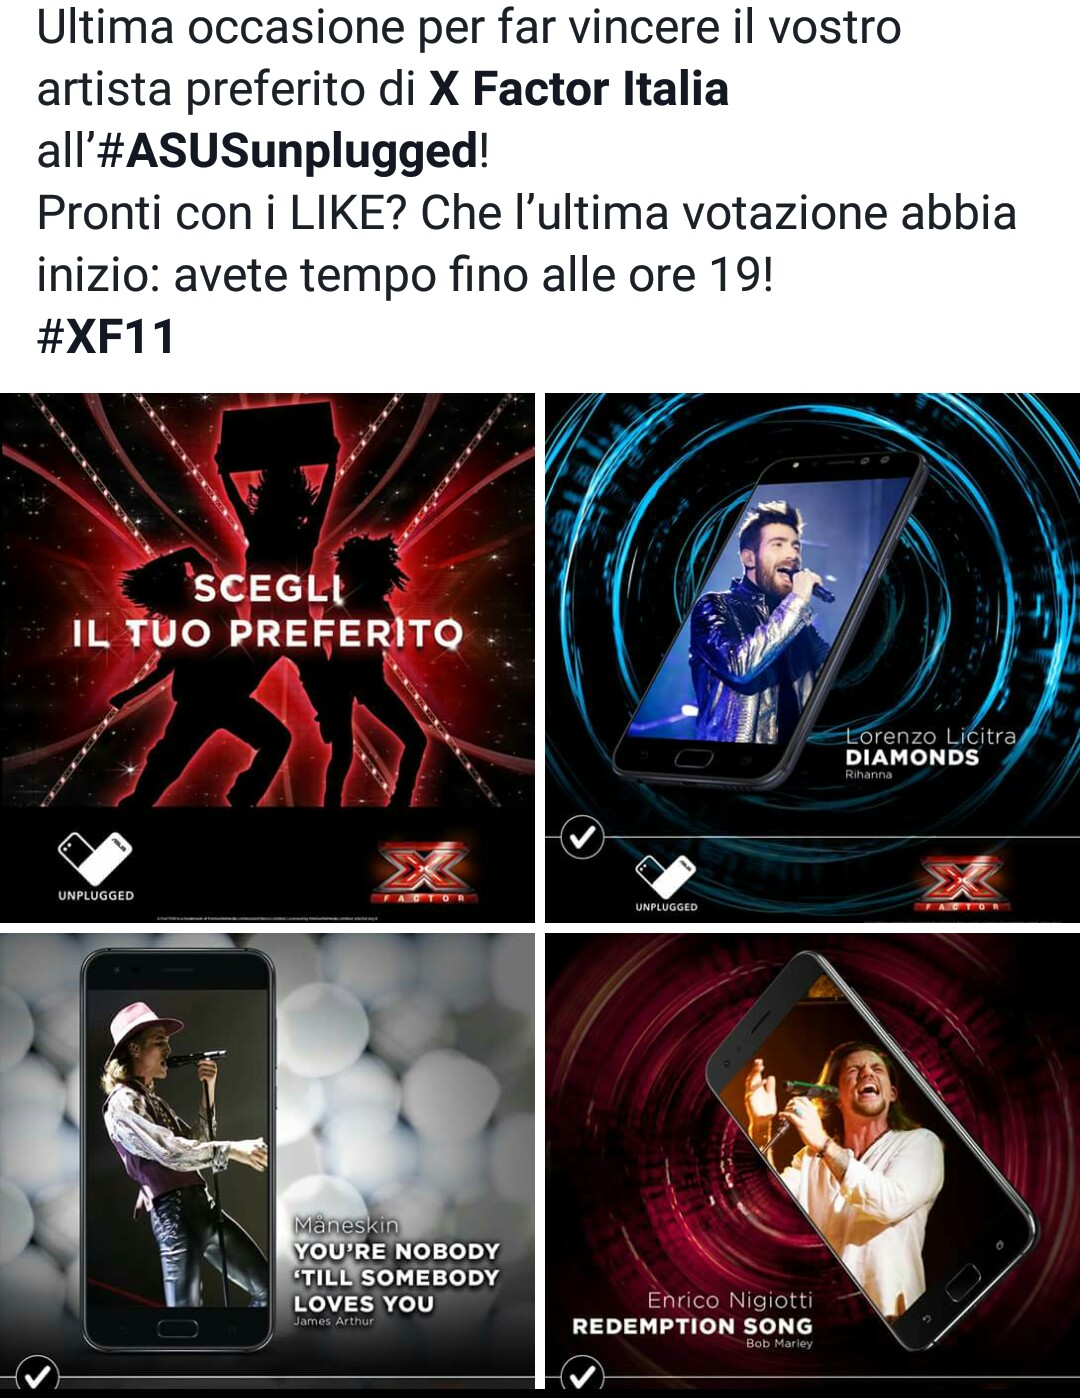 x factor asus unplugged